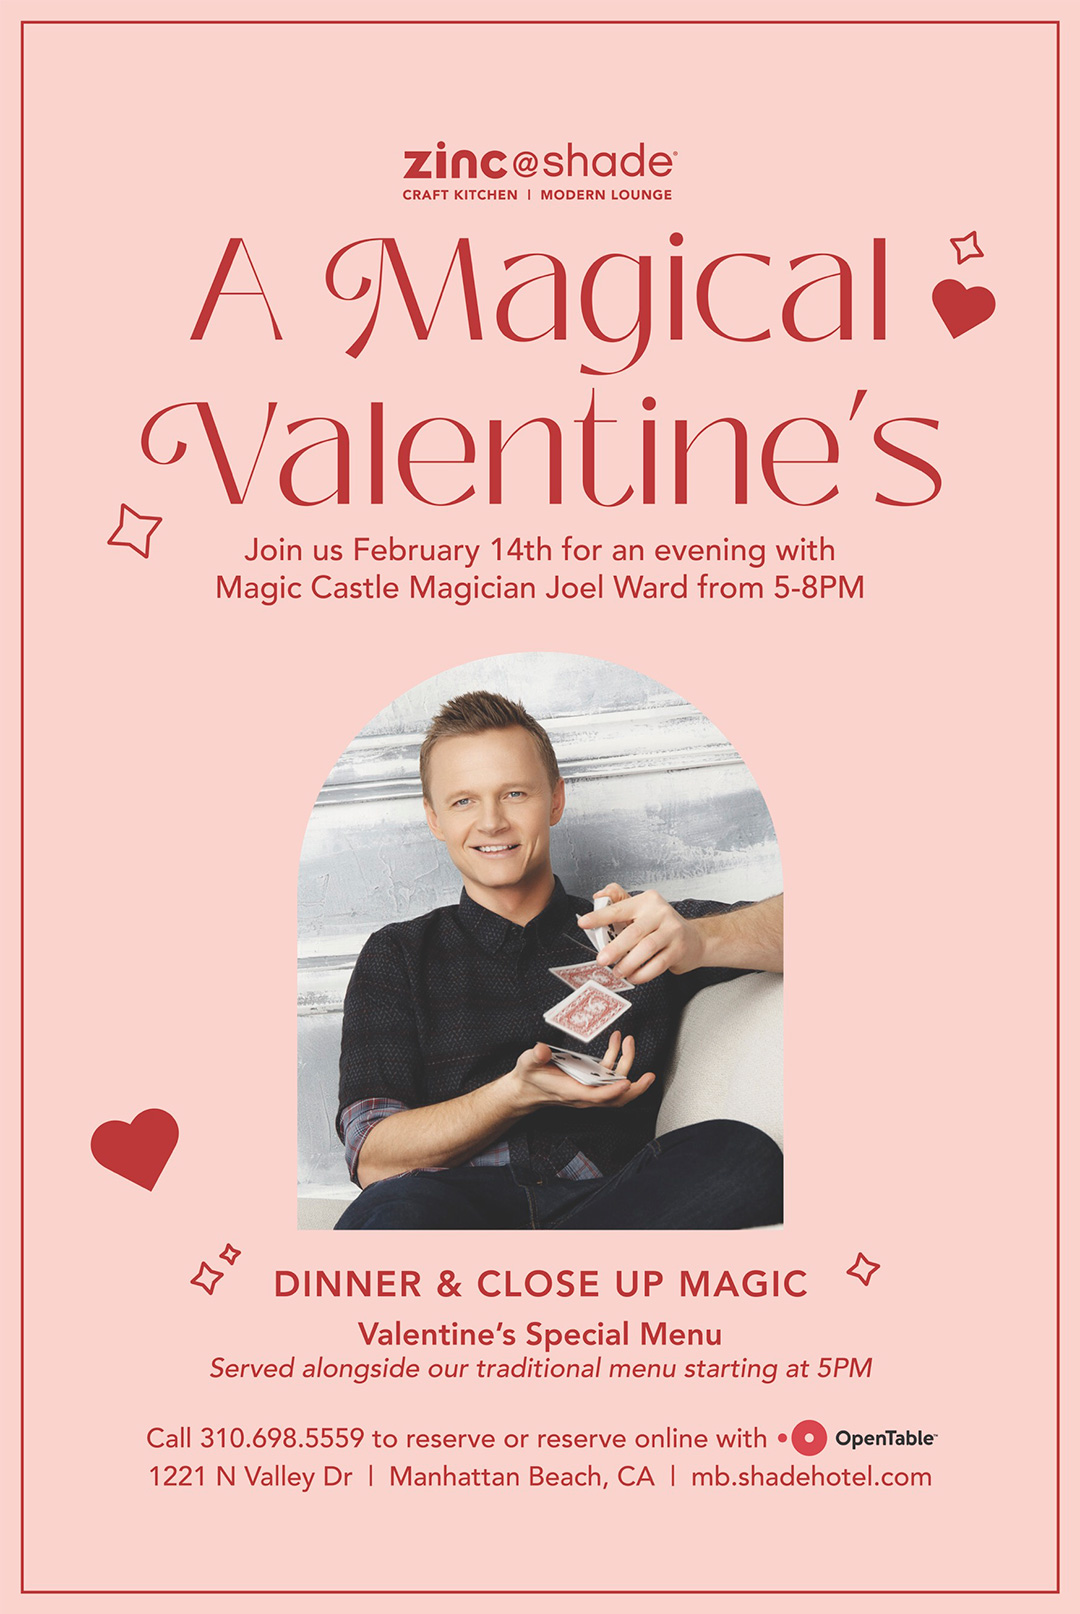 Valentine's Day menu spacials promotional poster